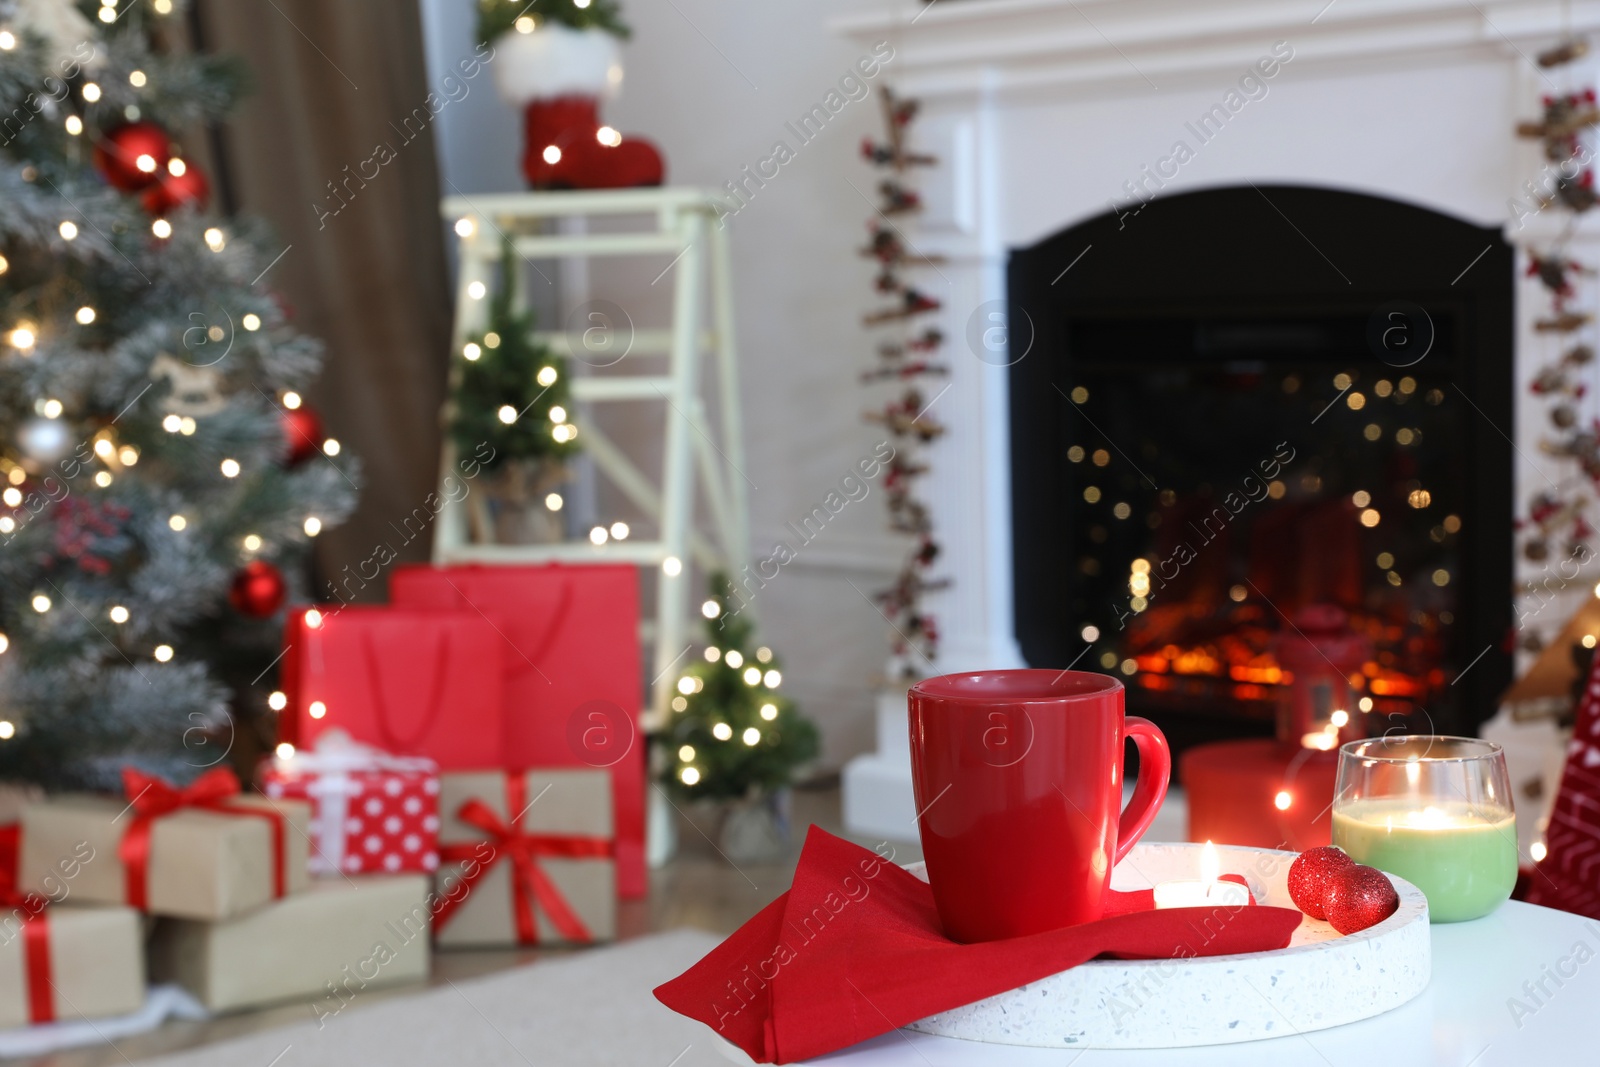 Photo of Candles and red cup on white table in room with Christmas decorations. Festive interior design